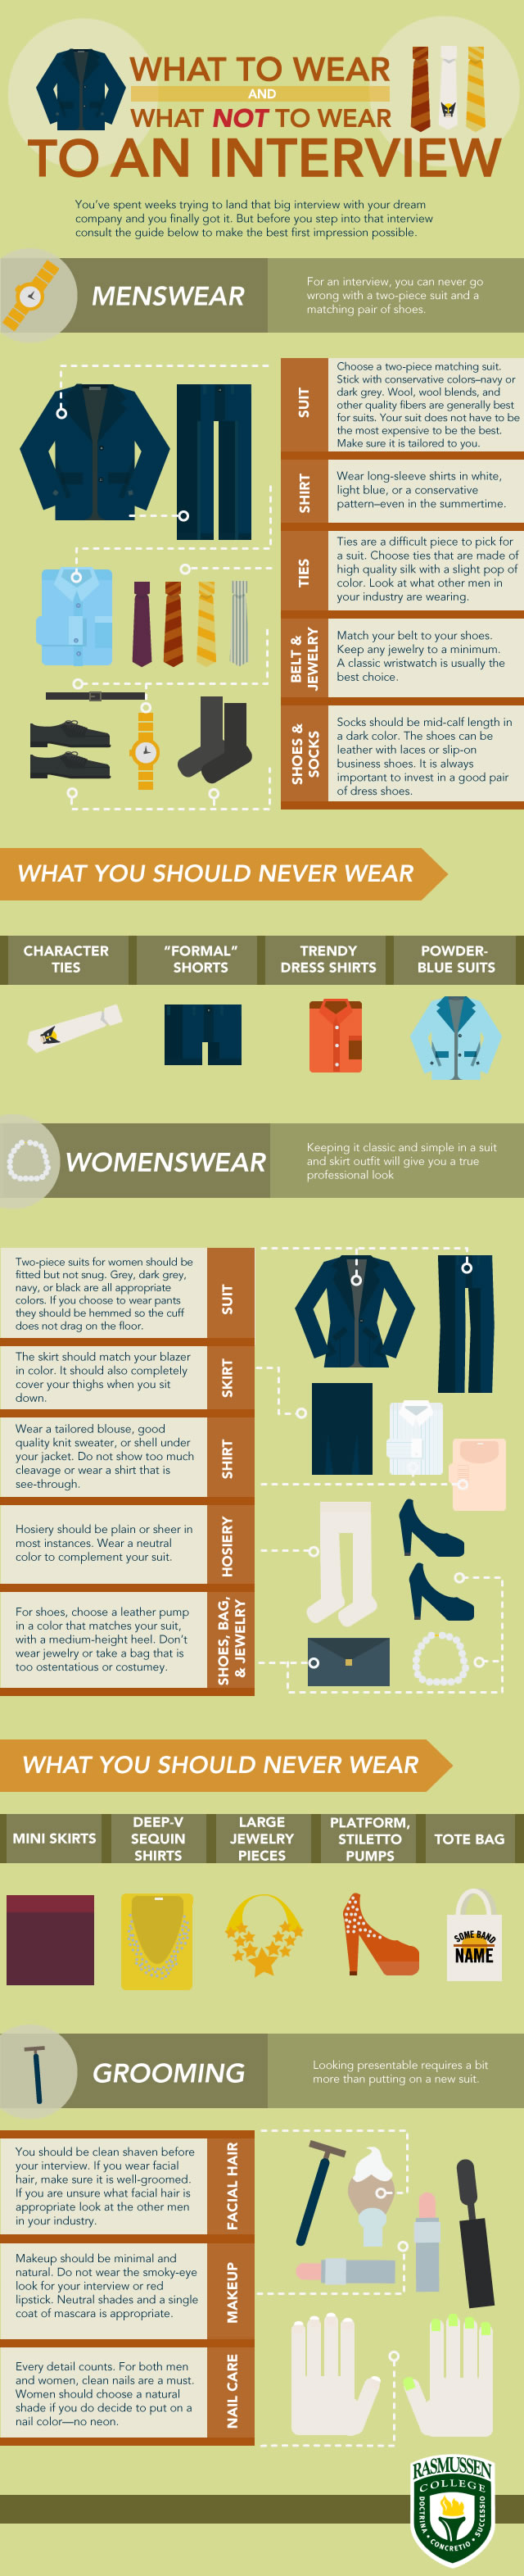 Dress for success for a job or university interview: tips from the